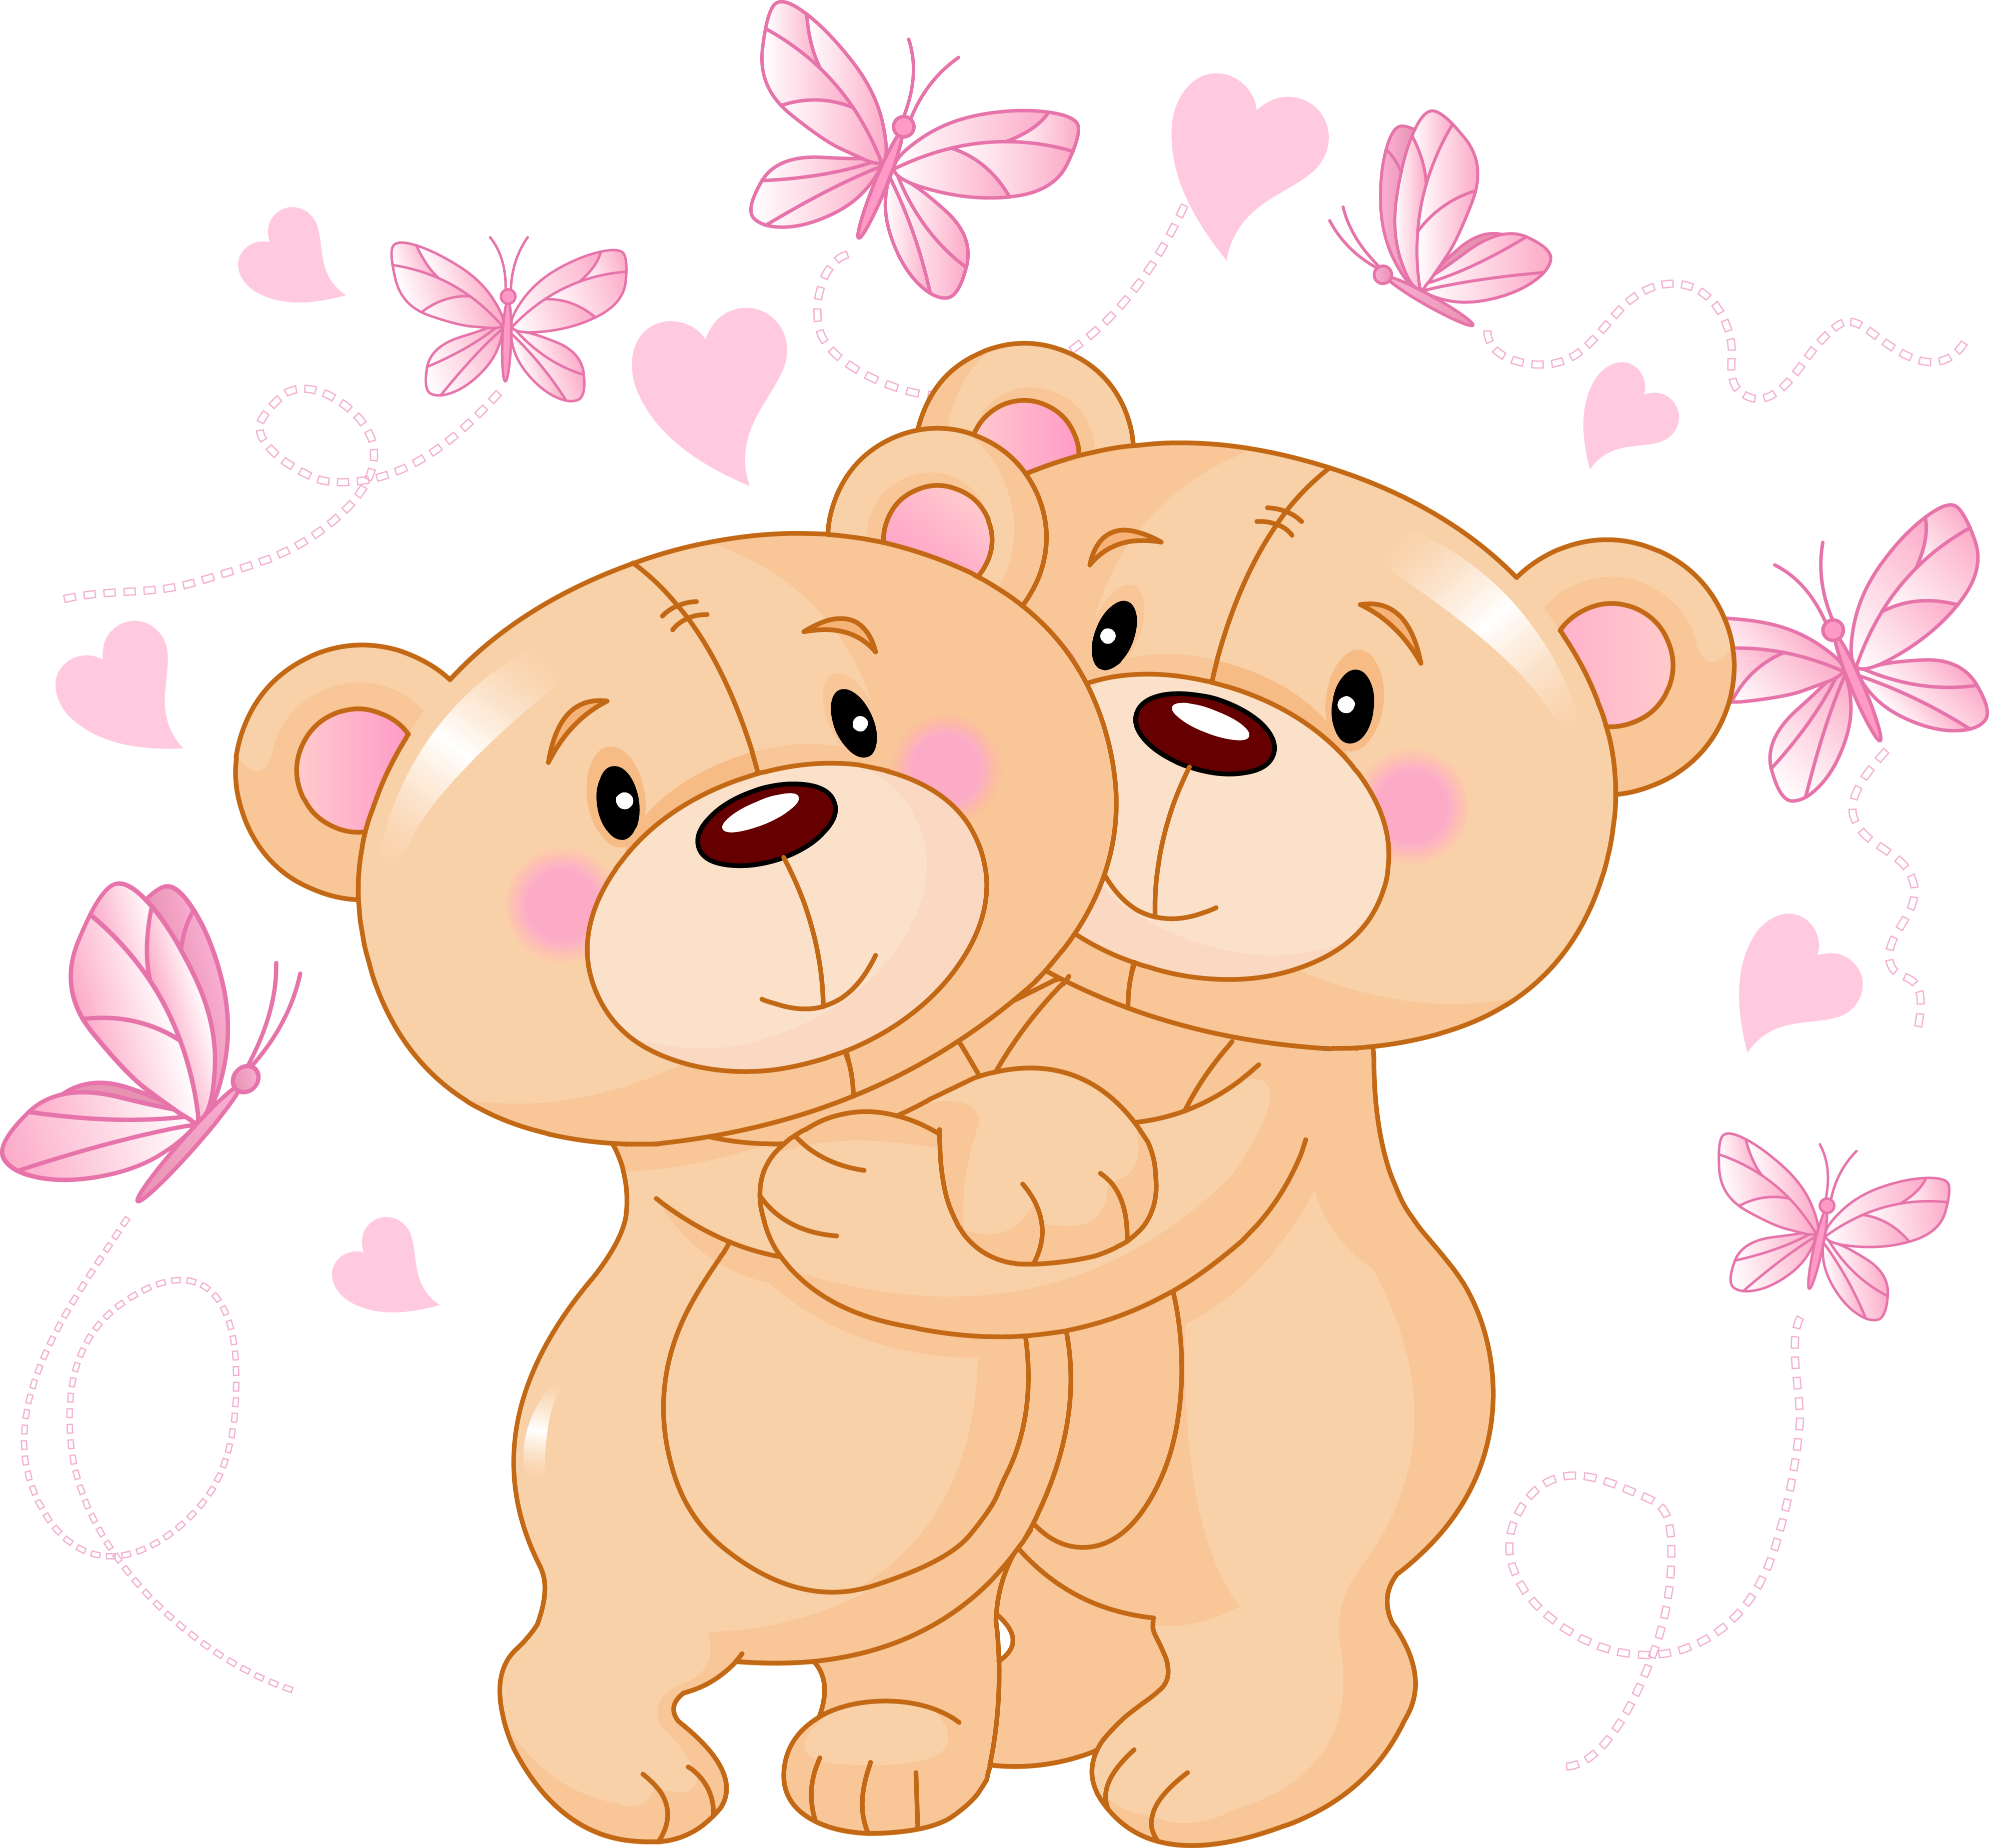 Cute Teddy Bears With Butterfly Royalty Free SVG, Cliparts